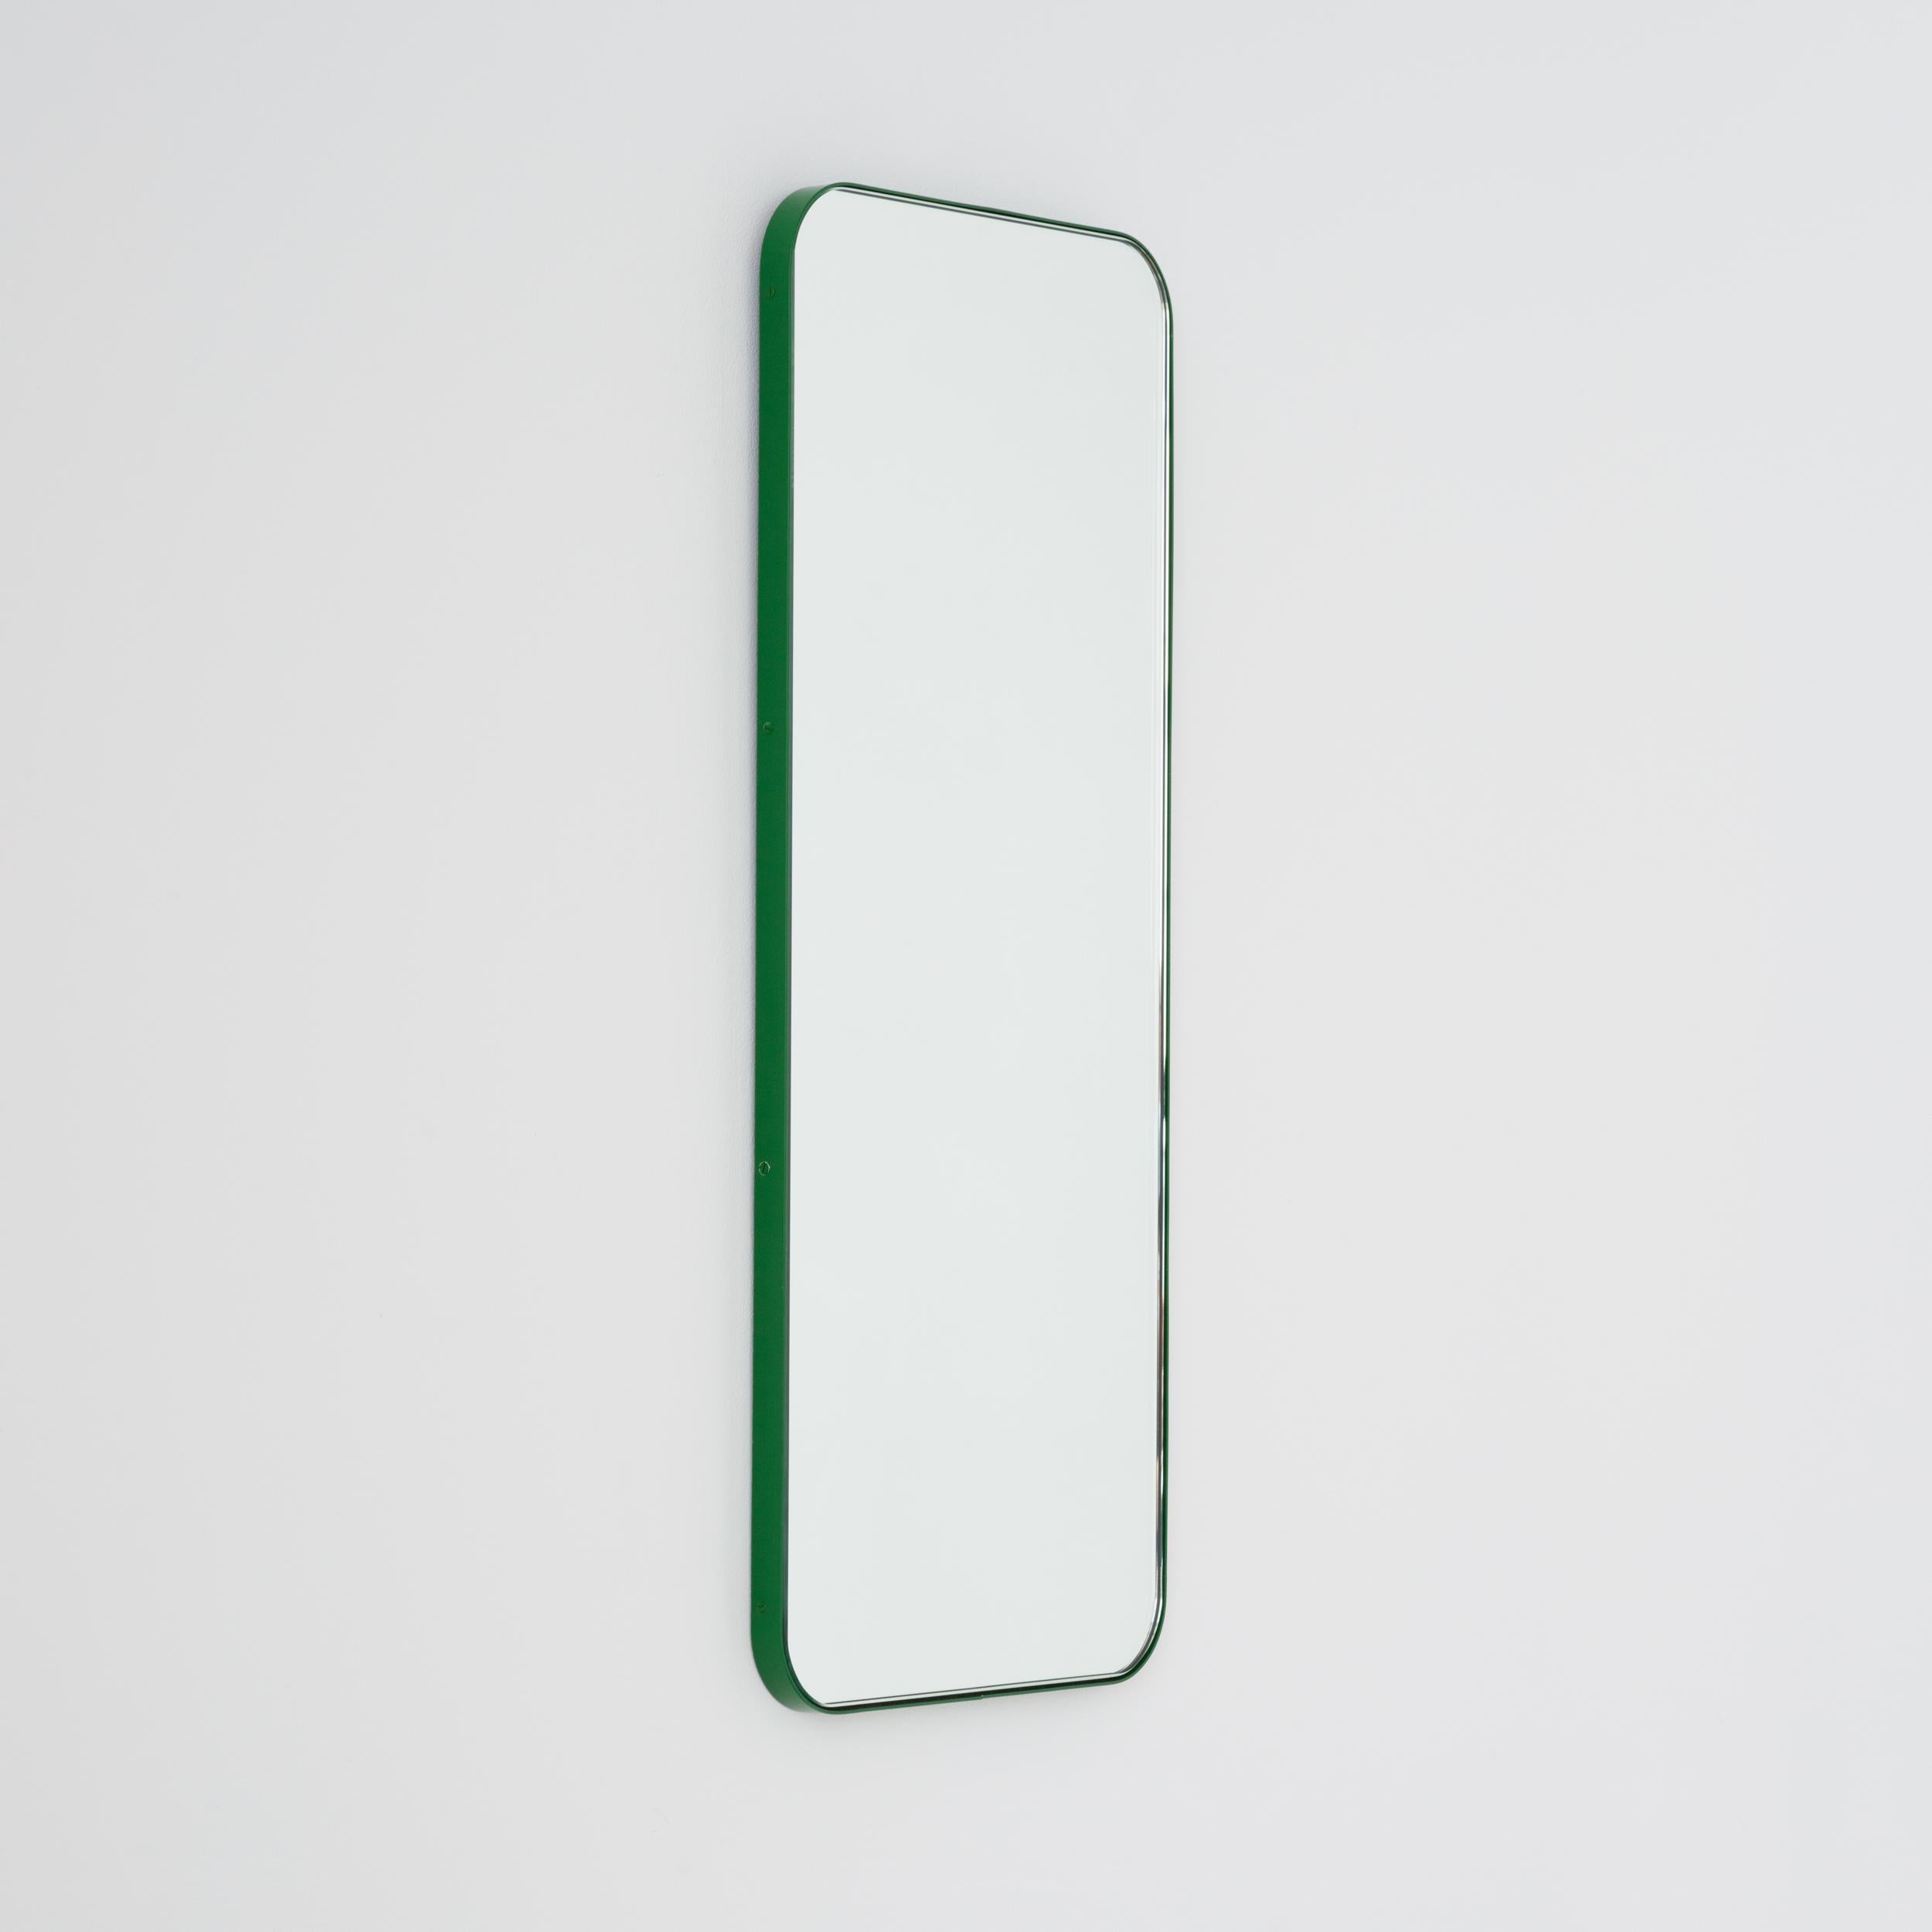 Powder-Coated Quadris Rectangular Modern Mirror with a Green Frame, Large For Sale